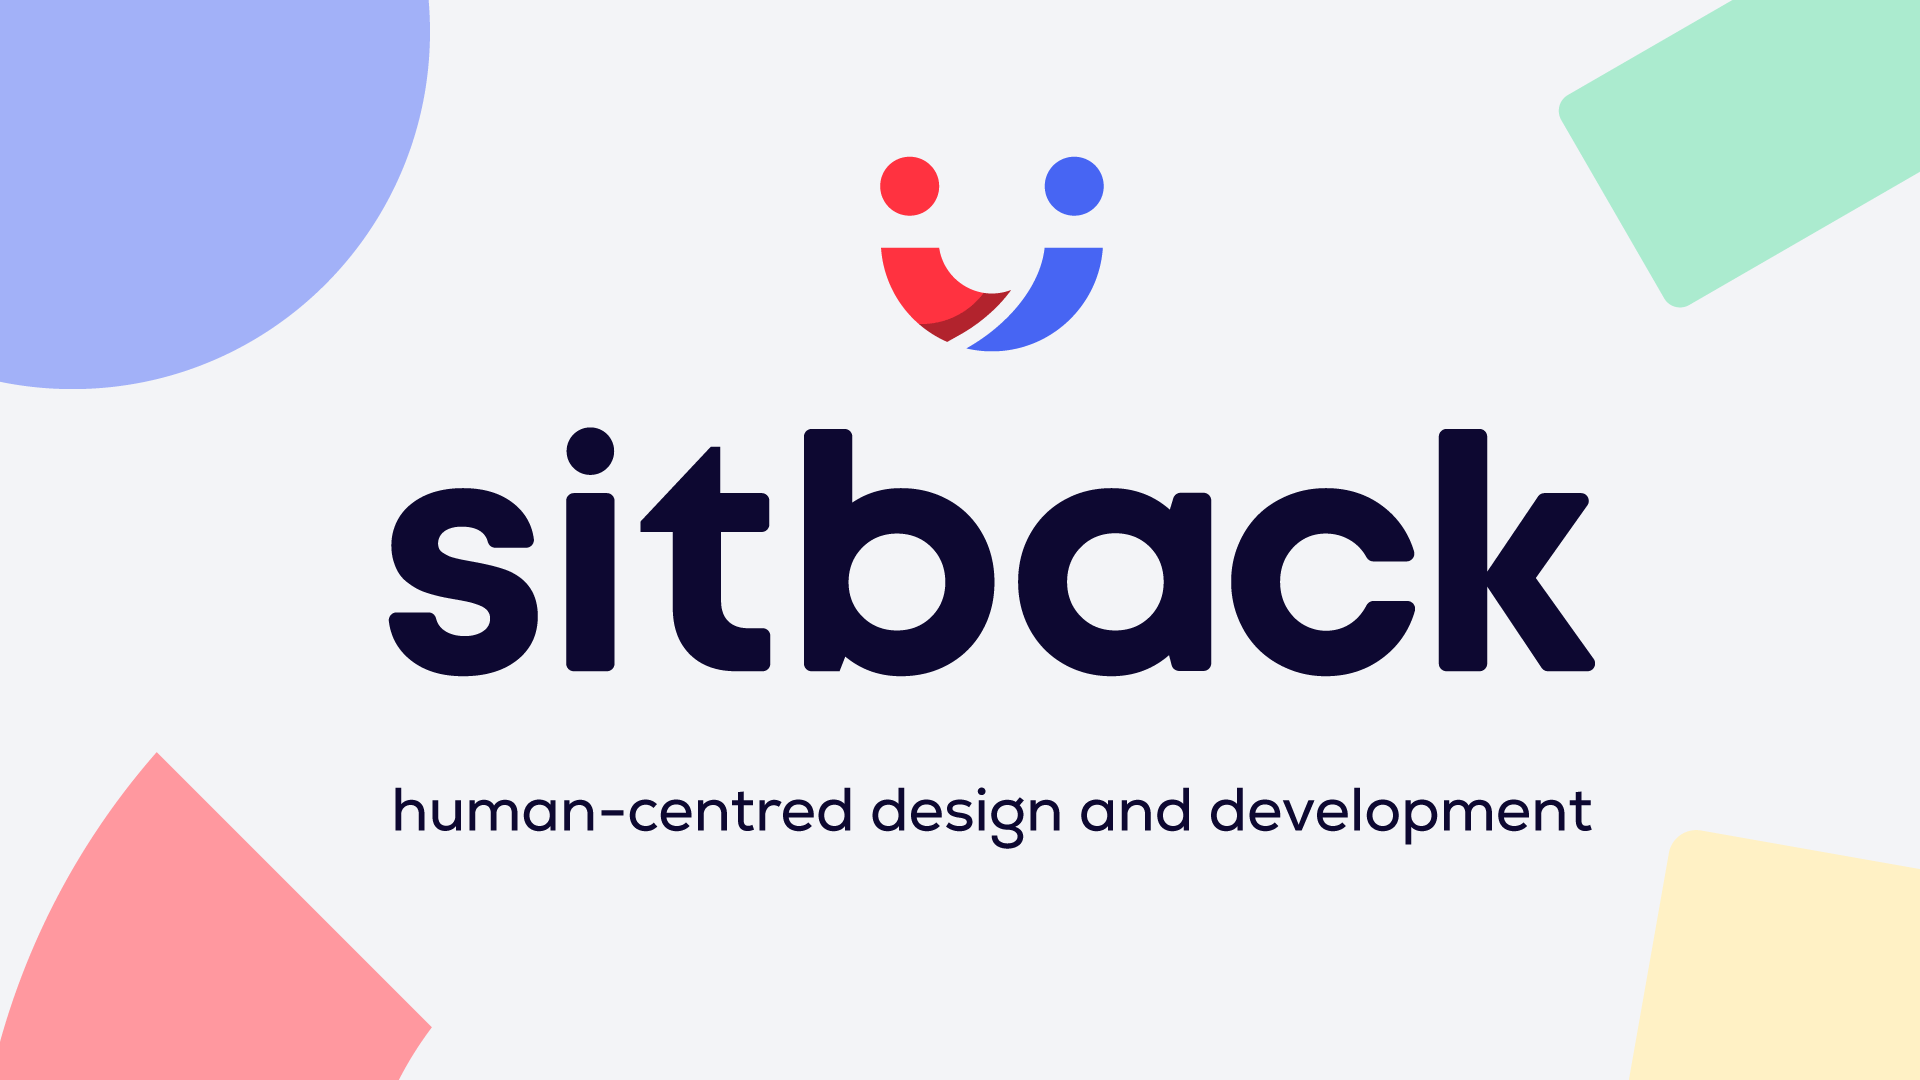 Sitback - Human-centred design and development